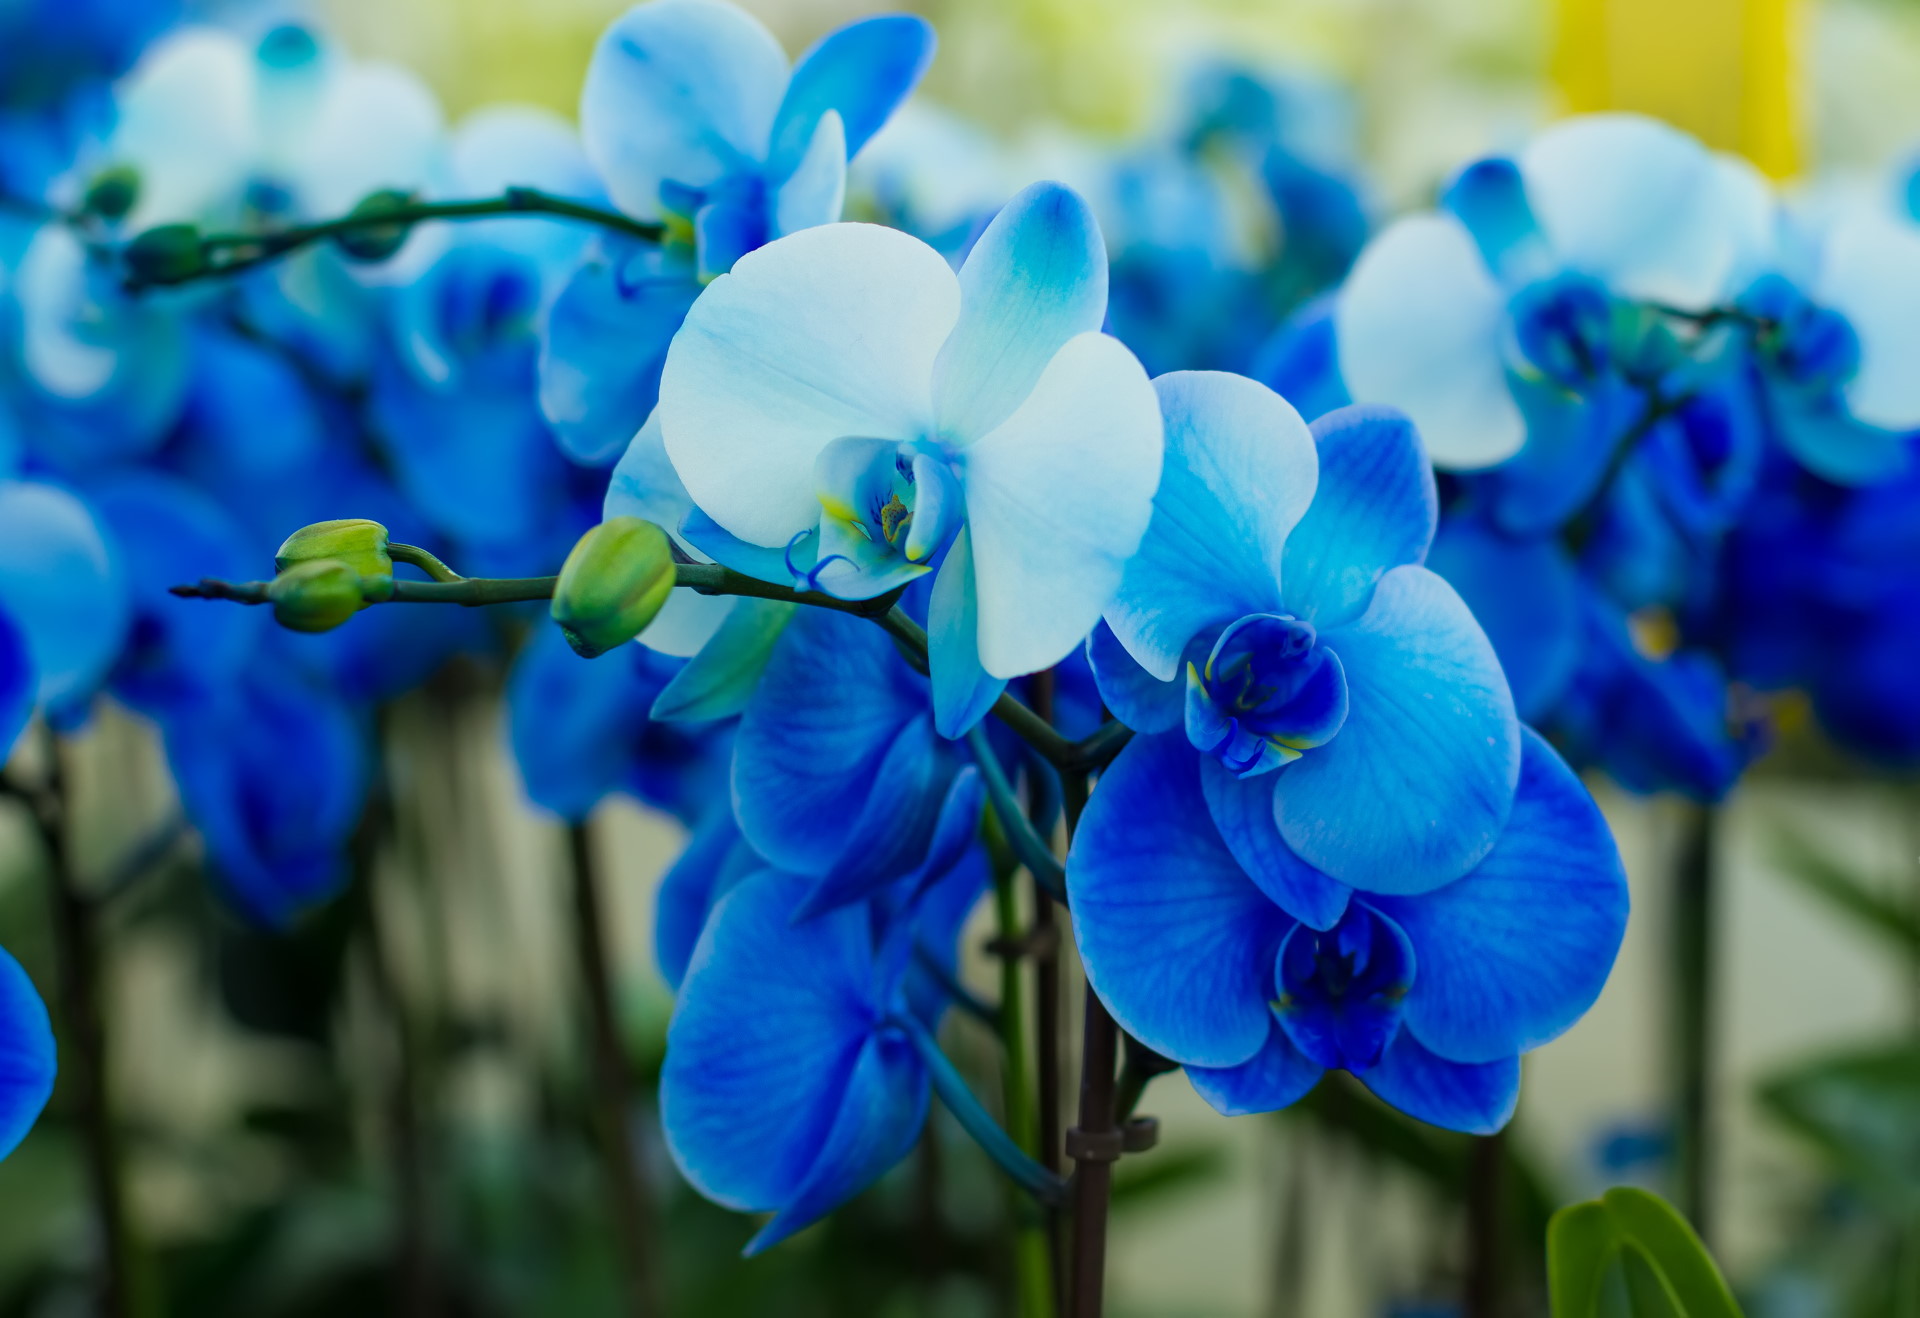 Are Blue Orchids Real? Yes and No... Here's Why - Brilliant Orchids